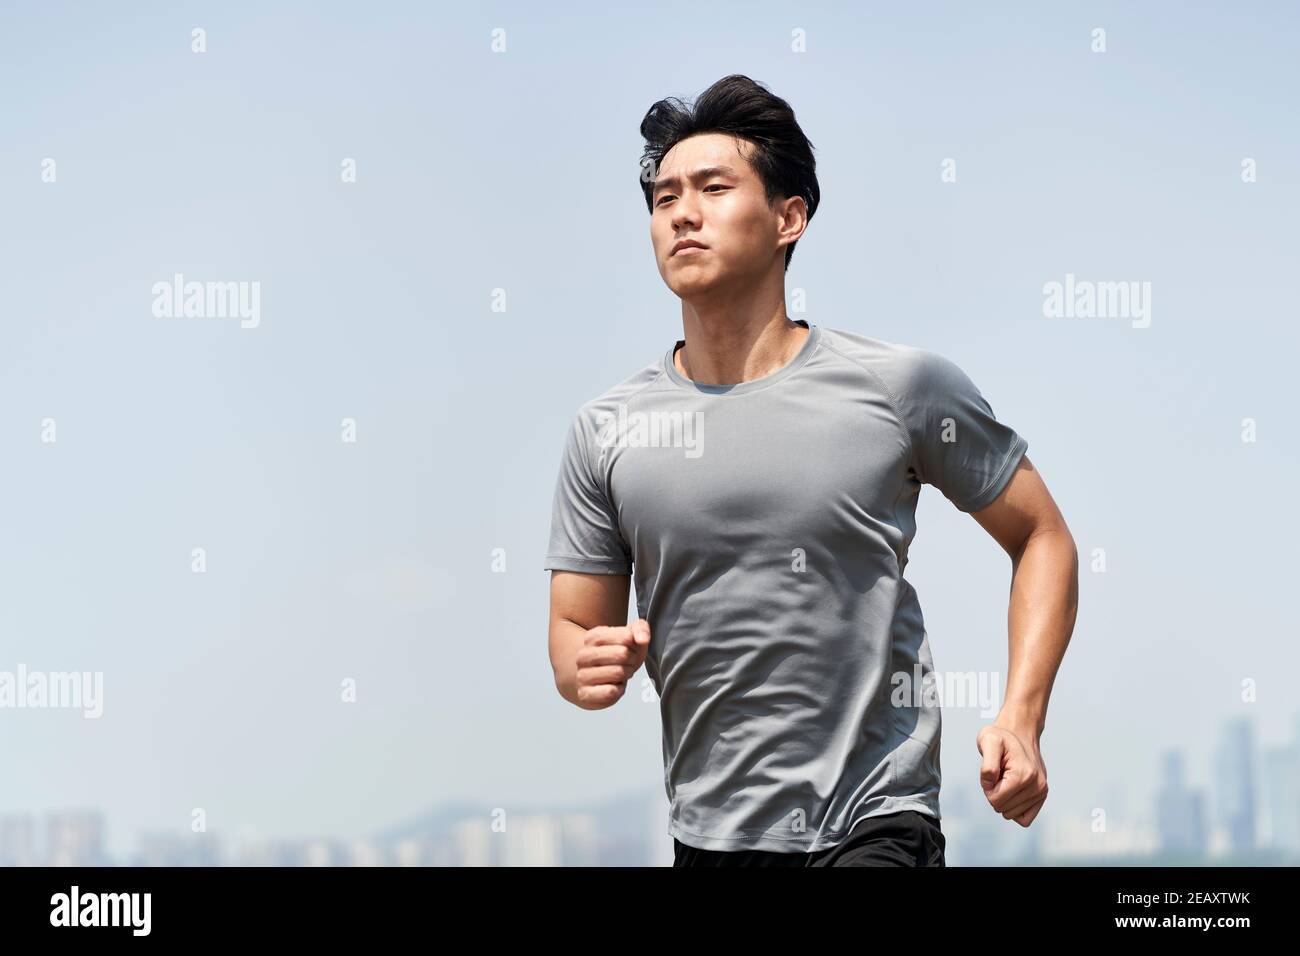 young asian man male runner jogger running jogging outdoors Stock Photo